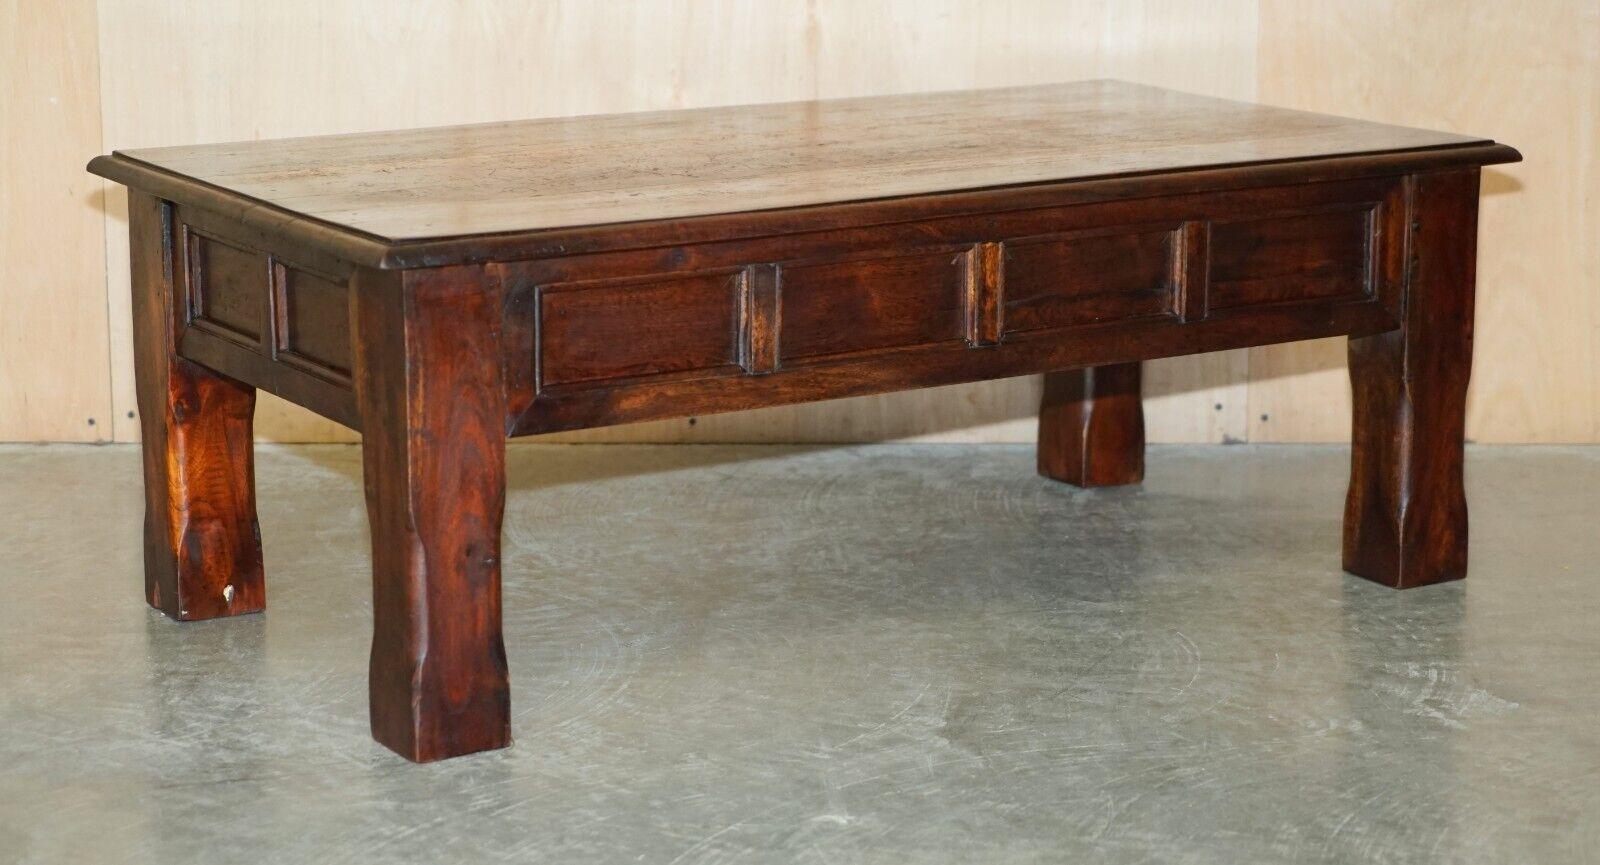 Royal House Antiques is delighted to offer for sale this nicely made oak coffee table.

Please note the delivery fee listed is just a guide, it covers within the M25 only for the UK and local Europe only for international, if you would like an